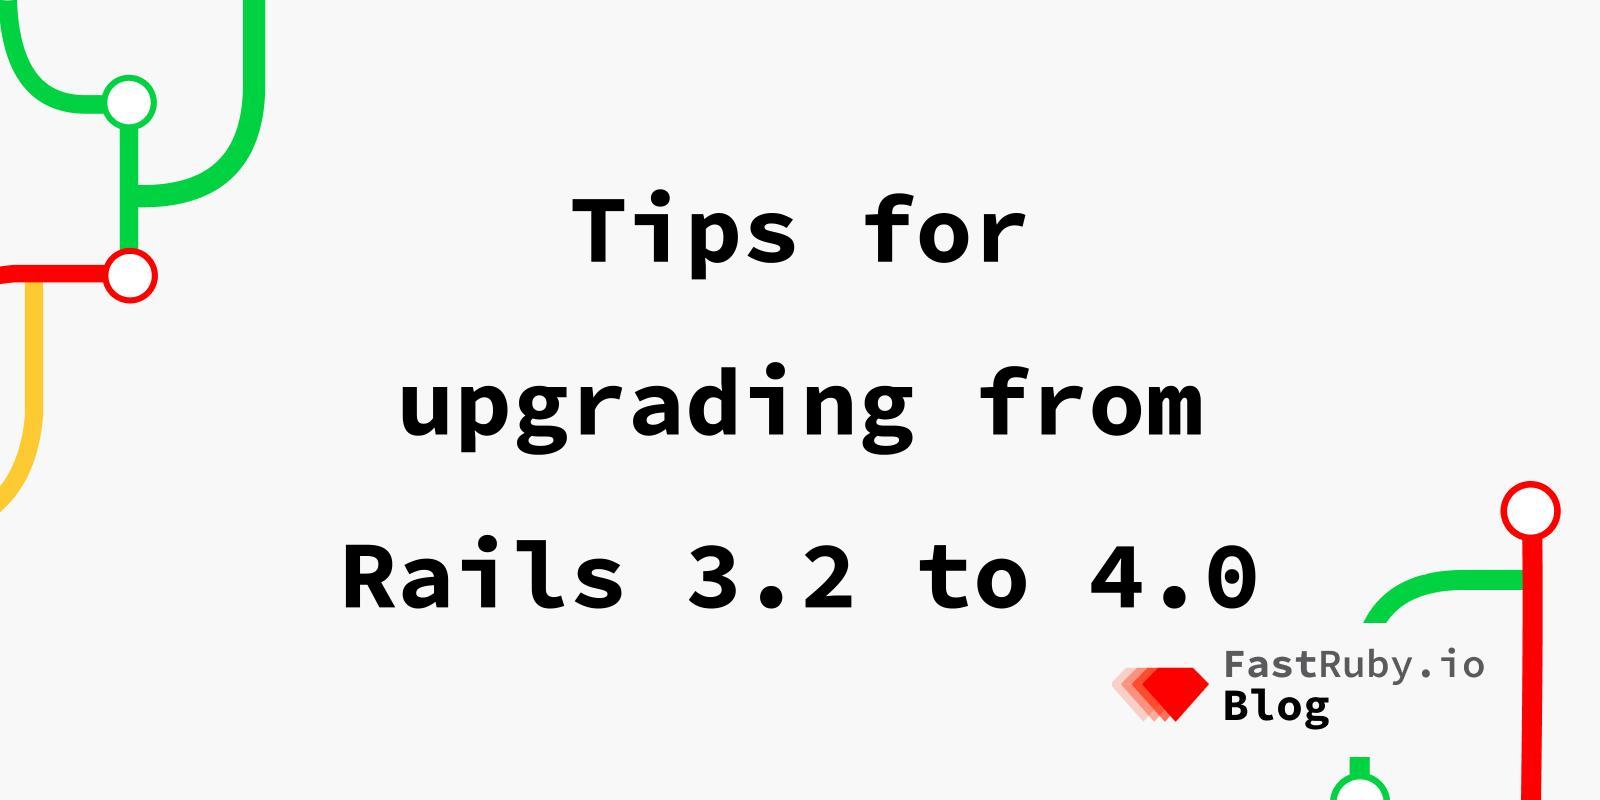 Tips for upgrading from Rails 3.2 to 4.0